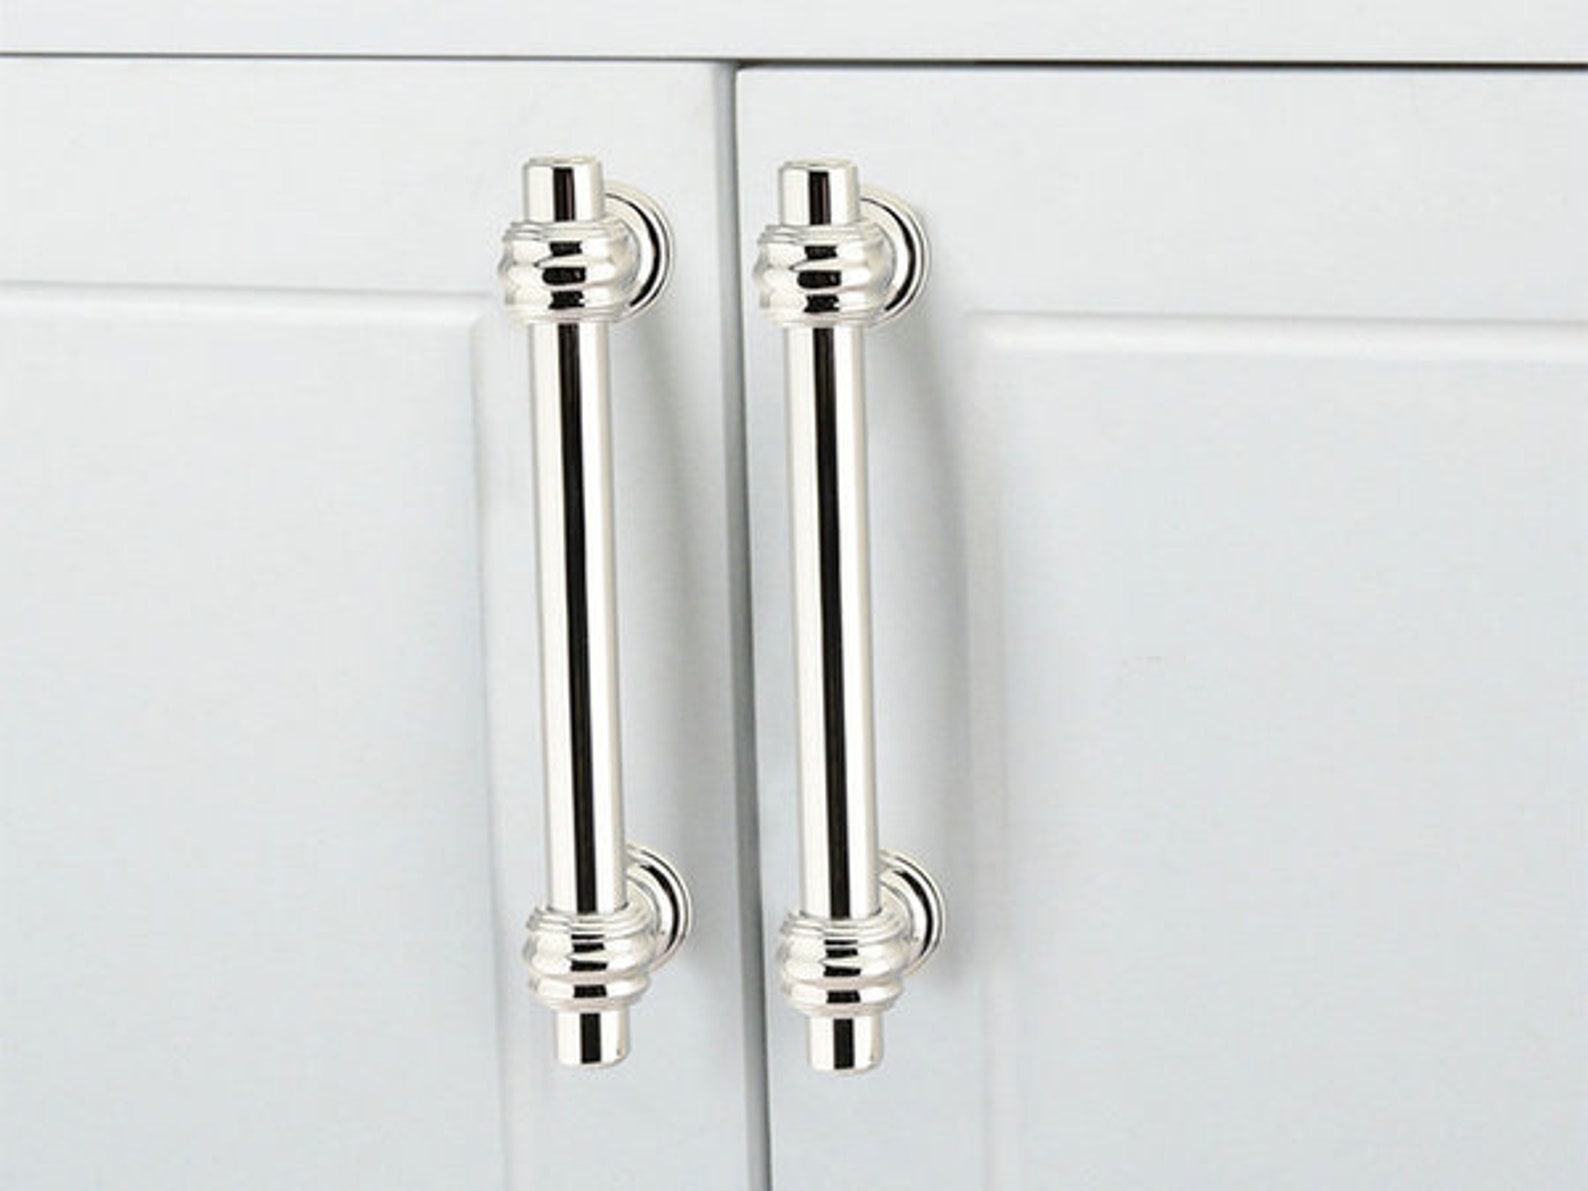 3.75 5 6.25 10 Cabinet Pull Handle - Etsy